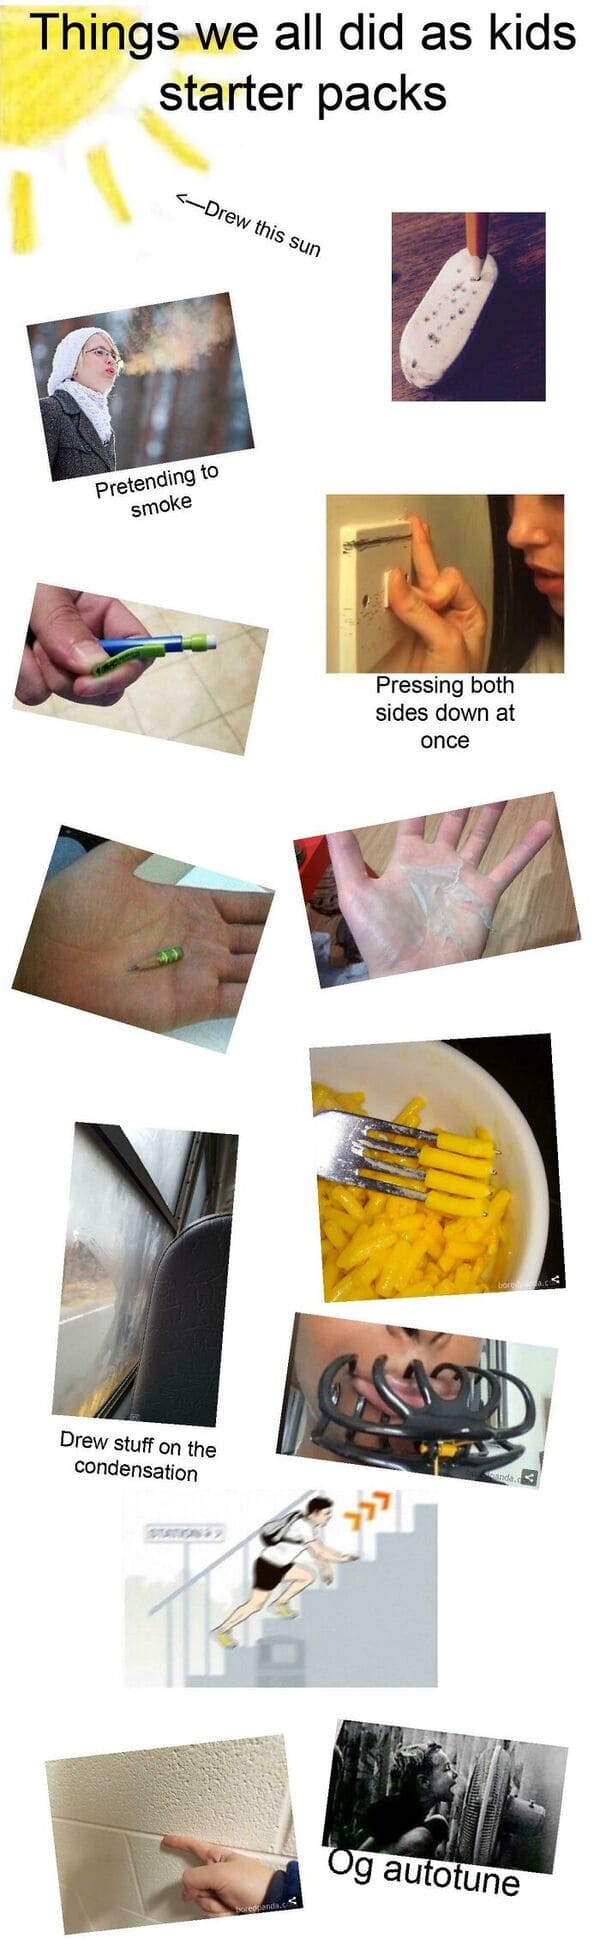 weird things we all did as kids starter pack poke holes in erasers mac and cheese fork swirl